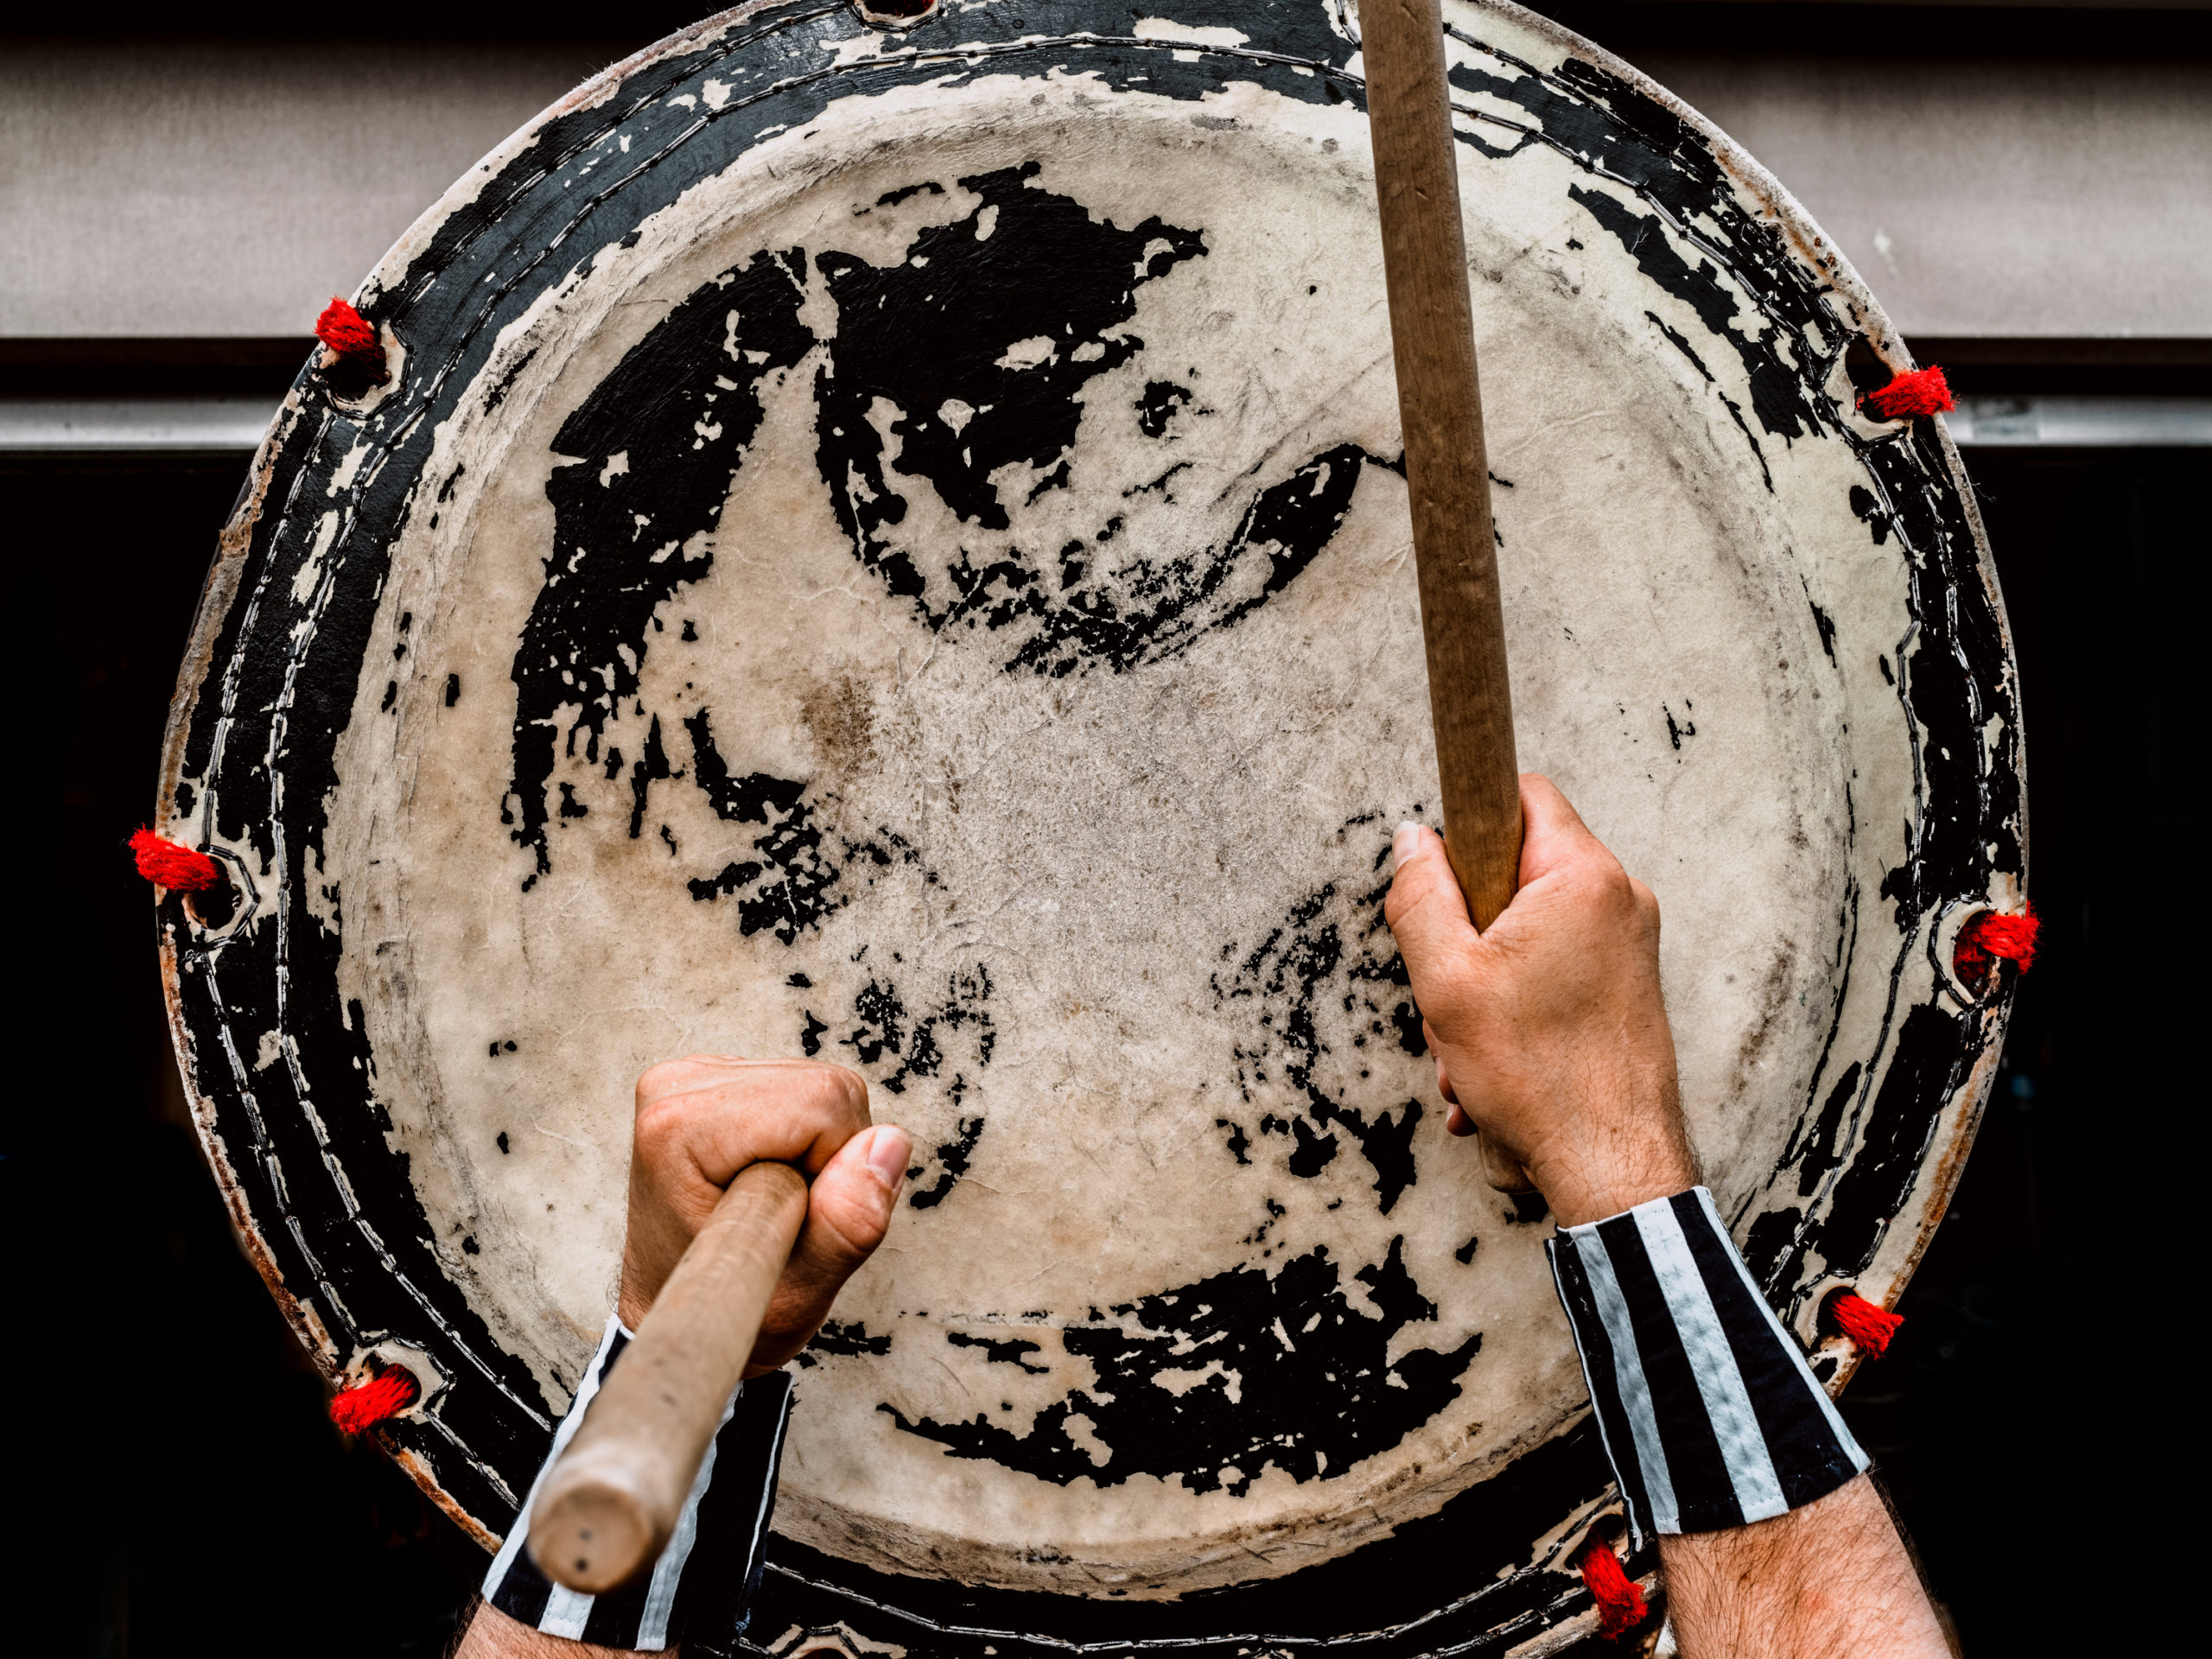 Showing hands of a taiko player beating drum sticks on his taiko drum